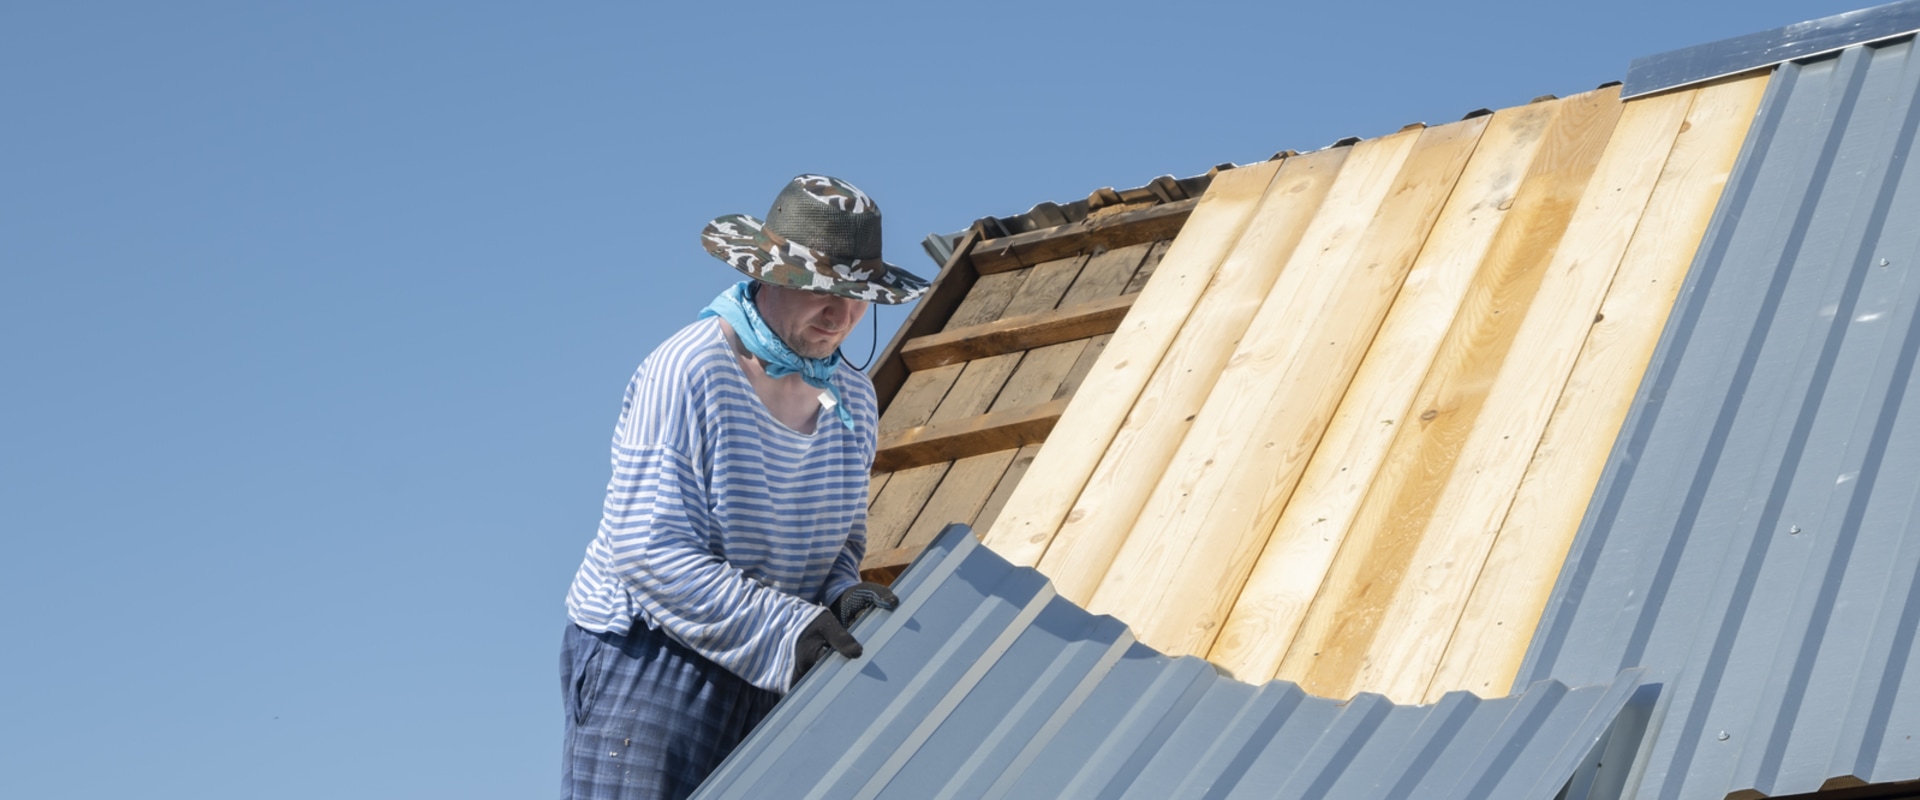 What Are The Risks Associated With Canberra Roof Replacement